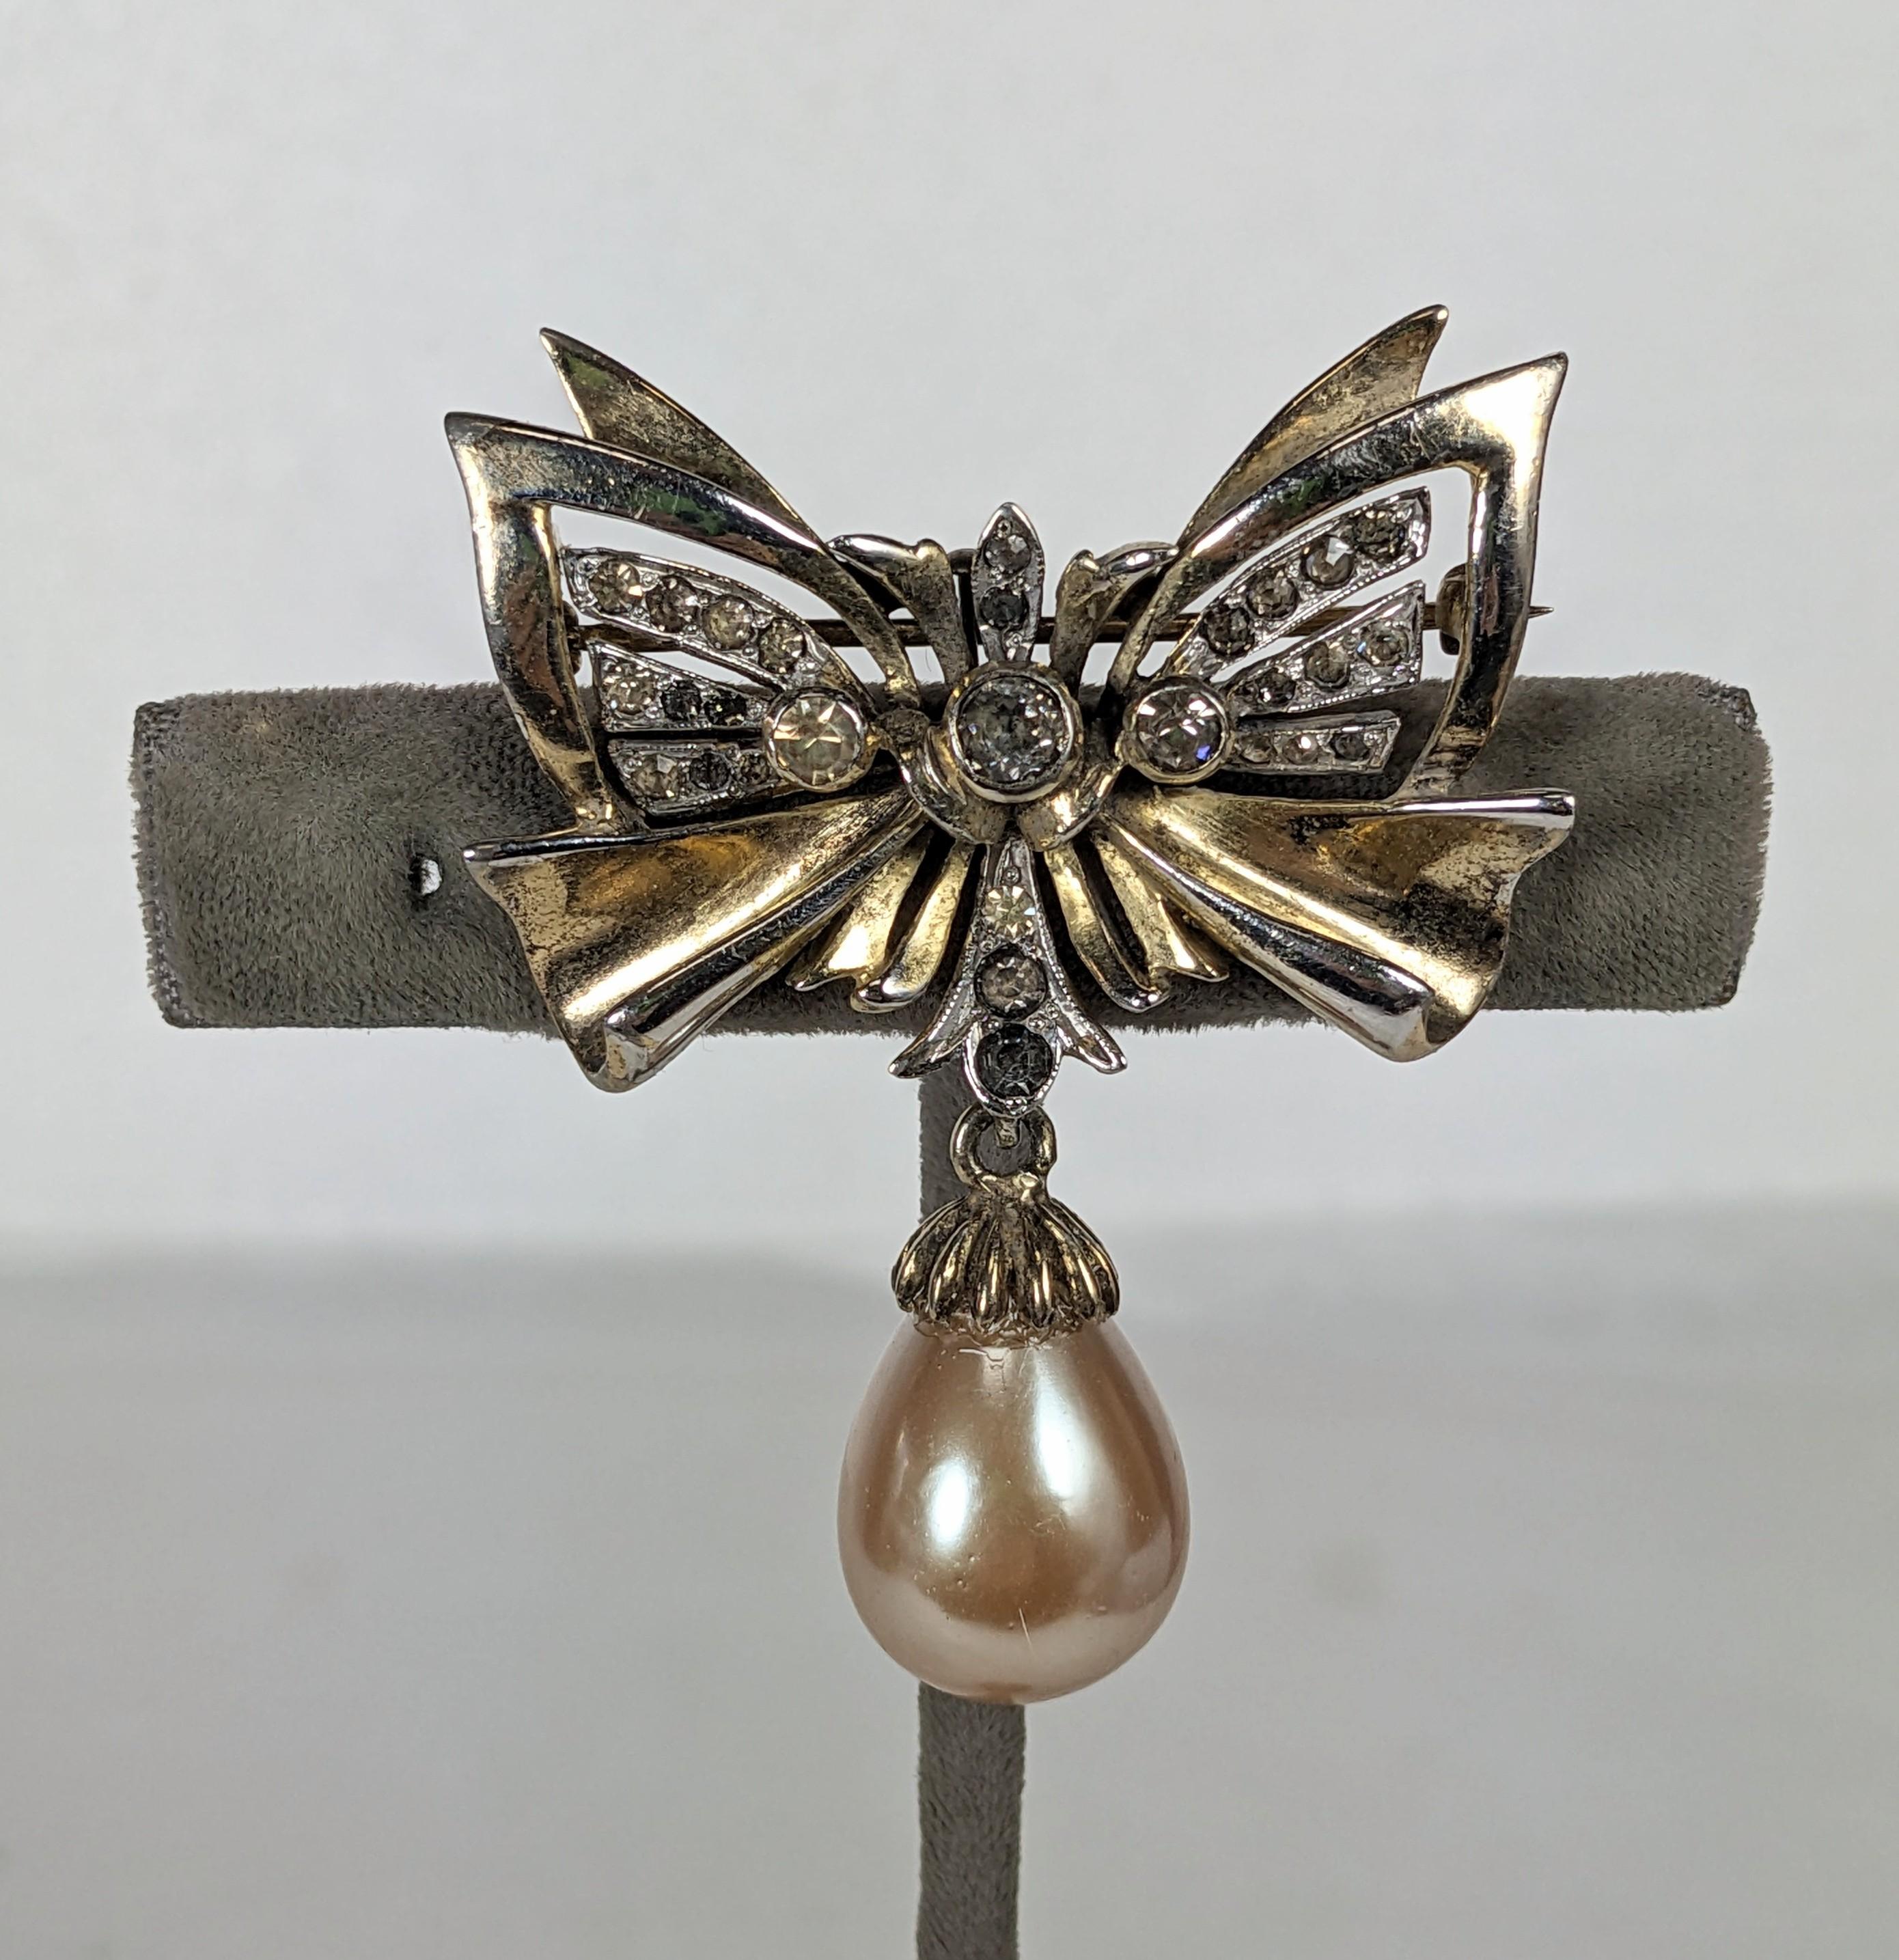 DeRosa Retro bow brooch of gold plated sterling silver, crystal rhinestone pave, with a large faux glass pearl articulated pendant. Excellent condition, Signed. L 2 1/8